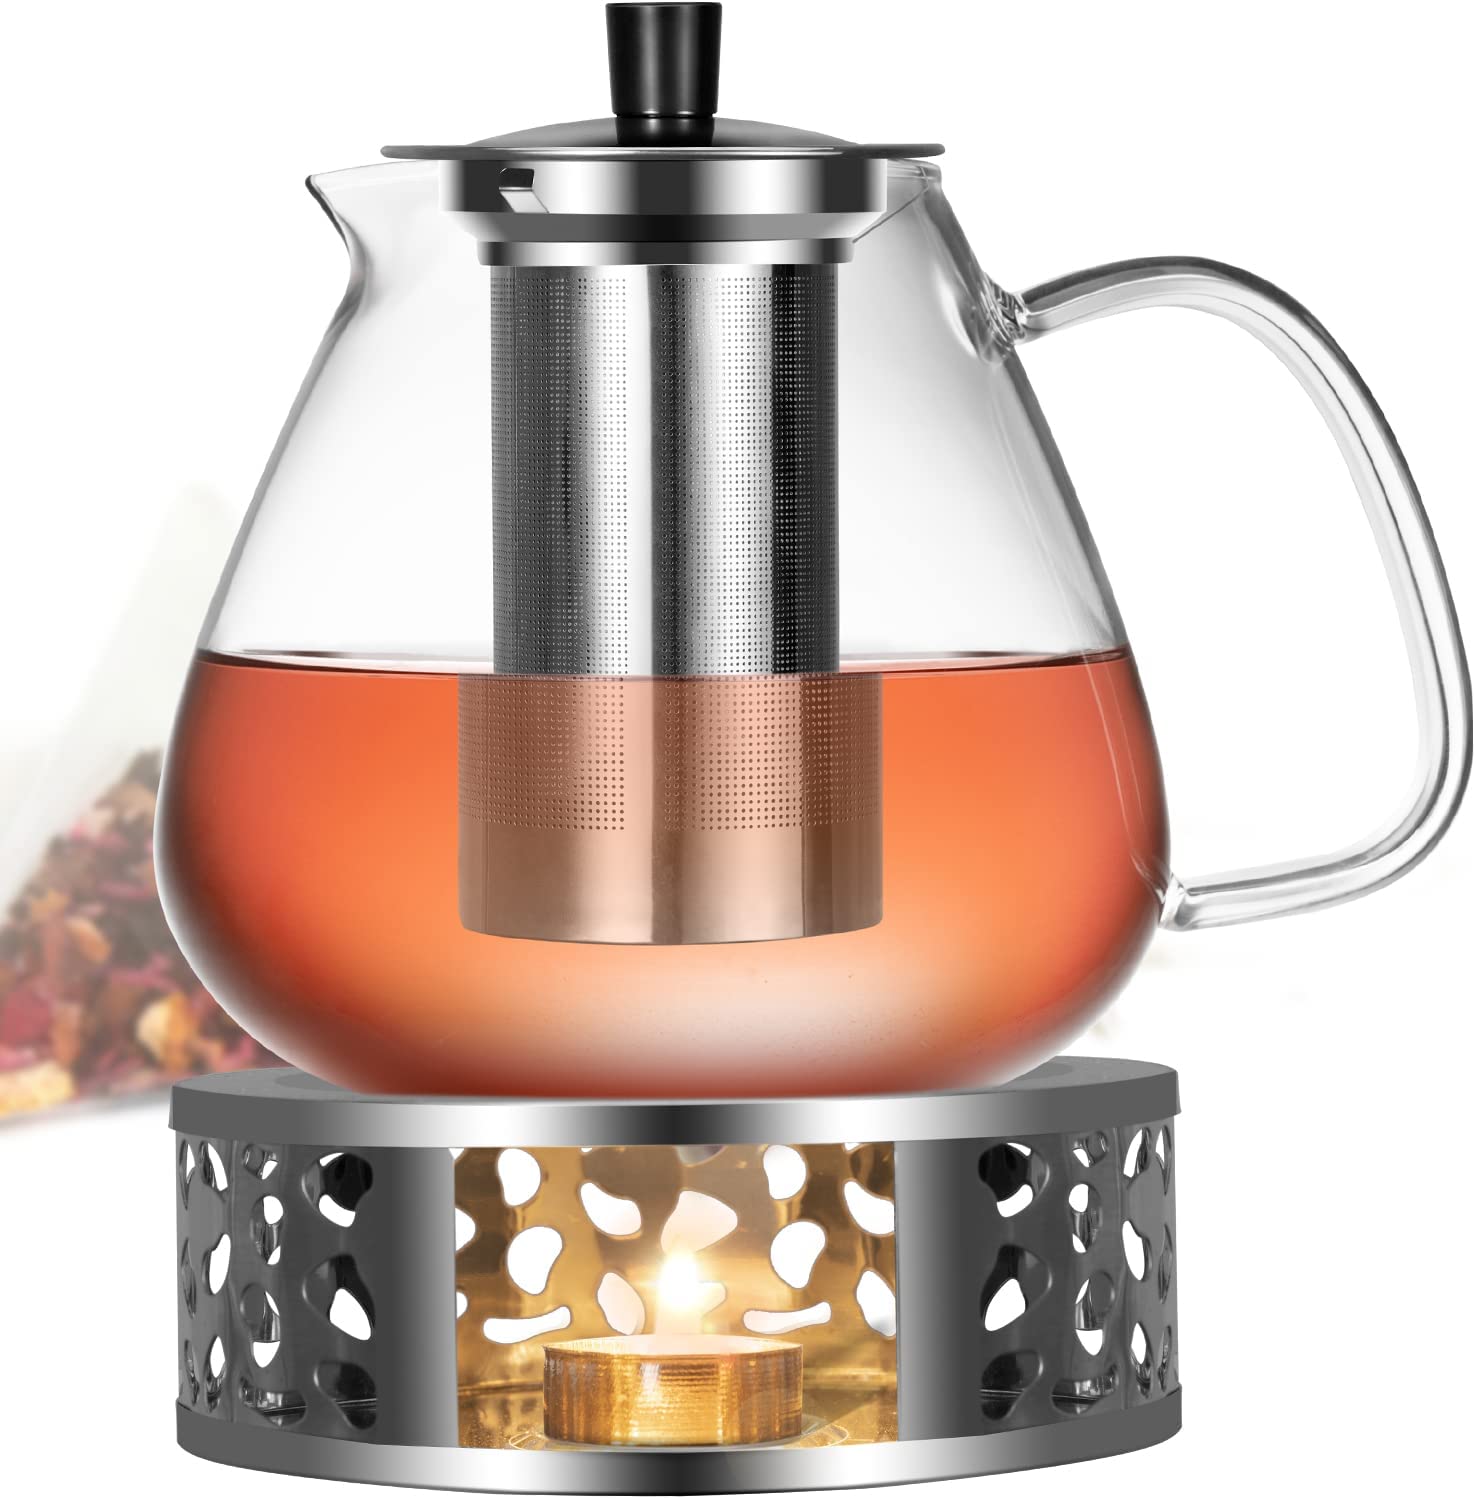 BUICXJKZ Glass Teapot - 1500 ml Teapot with Strainer Insert, Candle Warmer, Dishwasher Safe, Glass Teapot for Cold and Hot Drinks, Tea Maker, 18/8 Stainless Steel Teapot Warmer